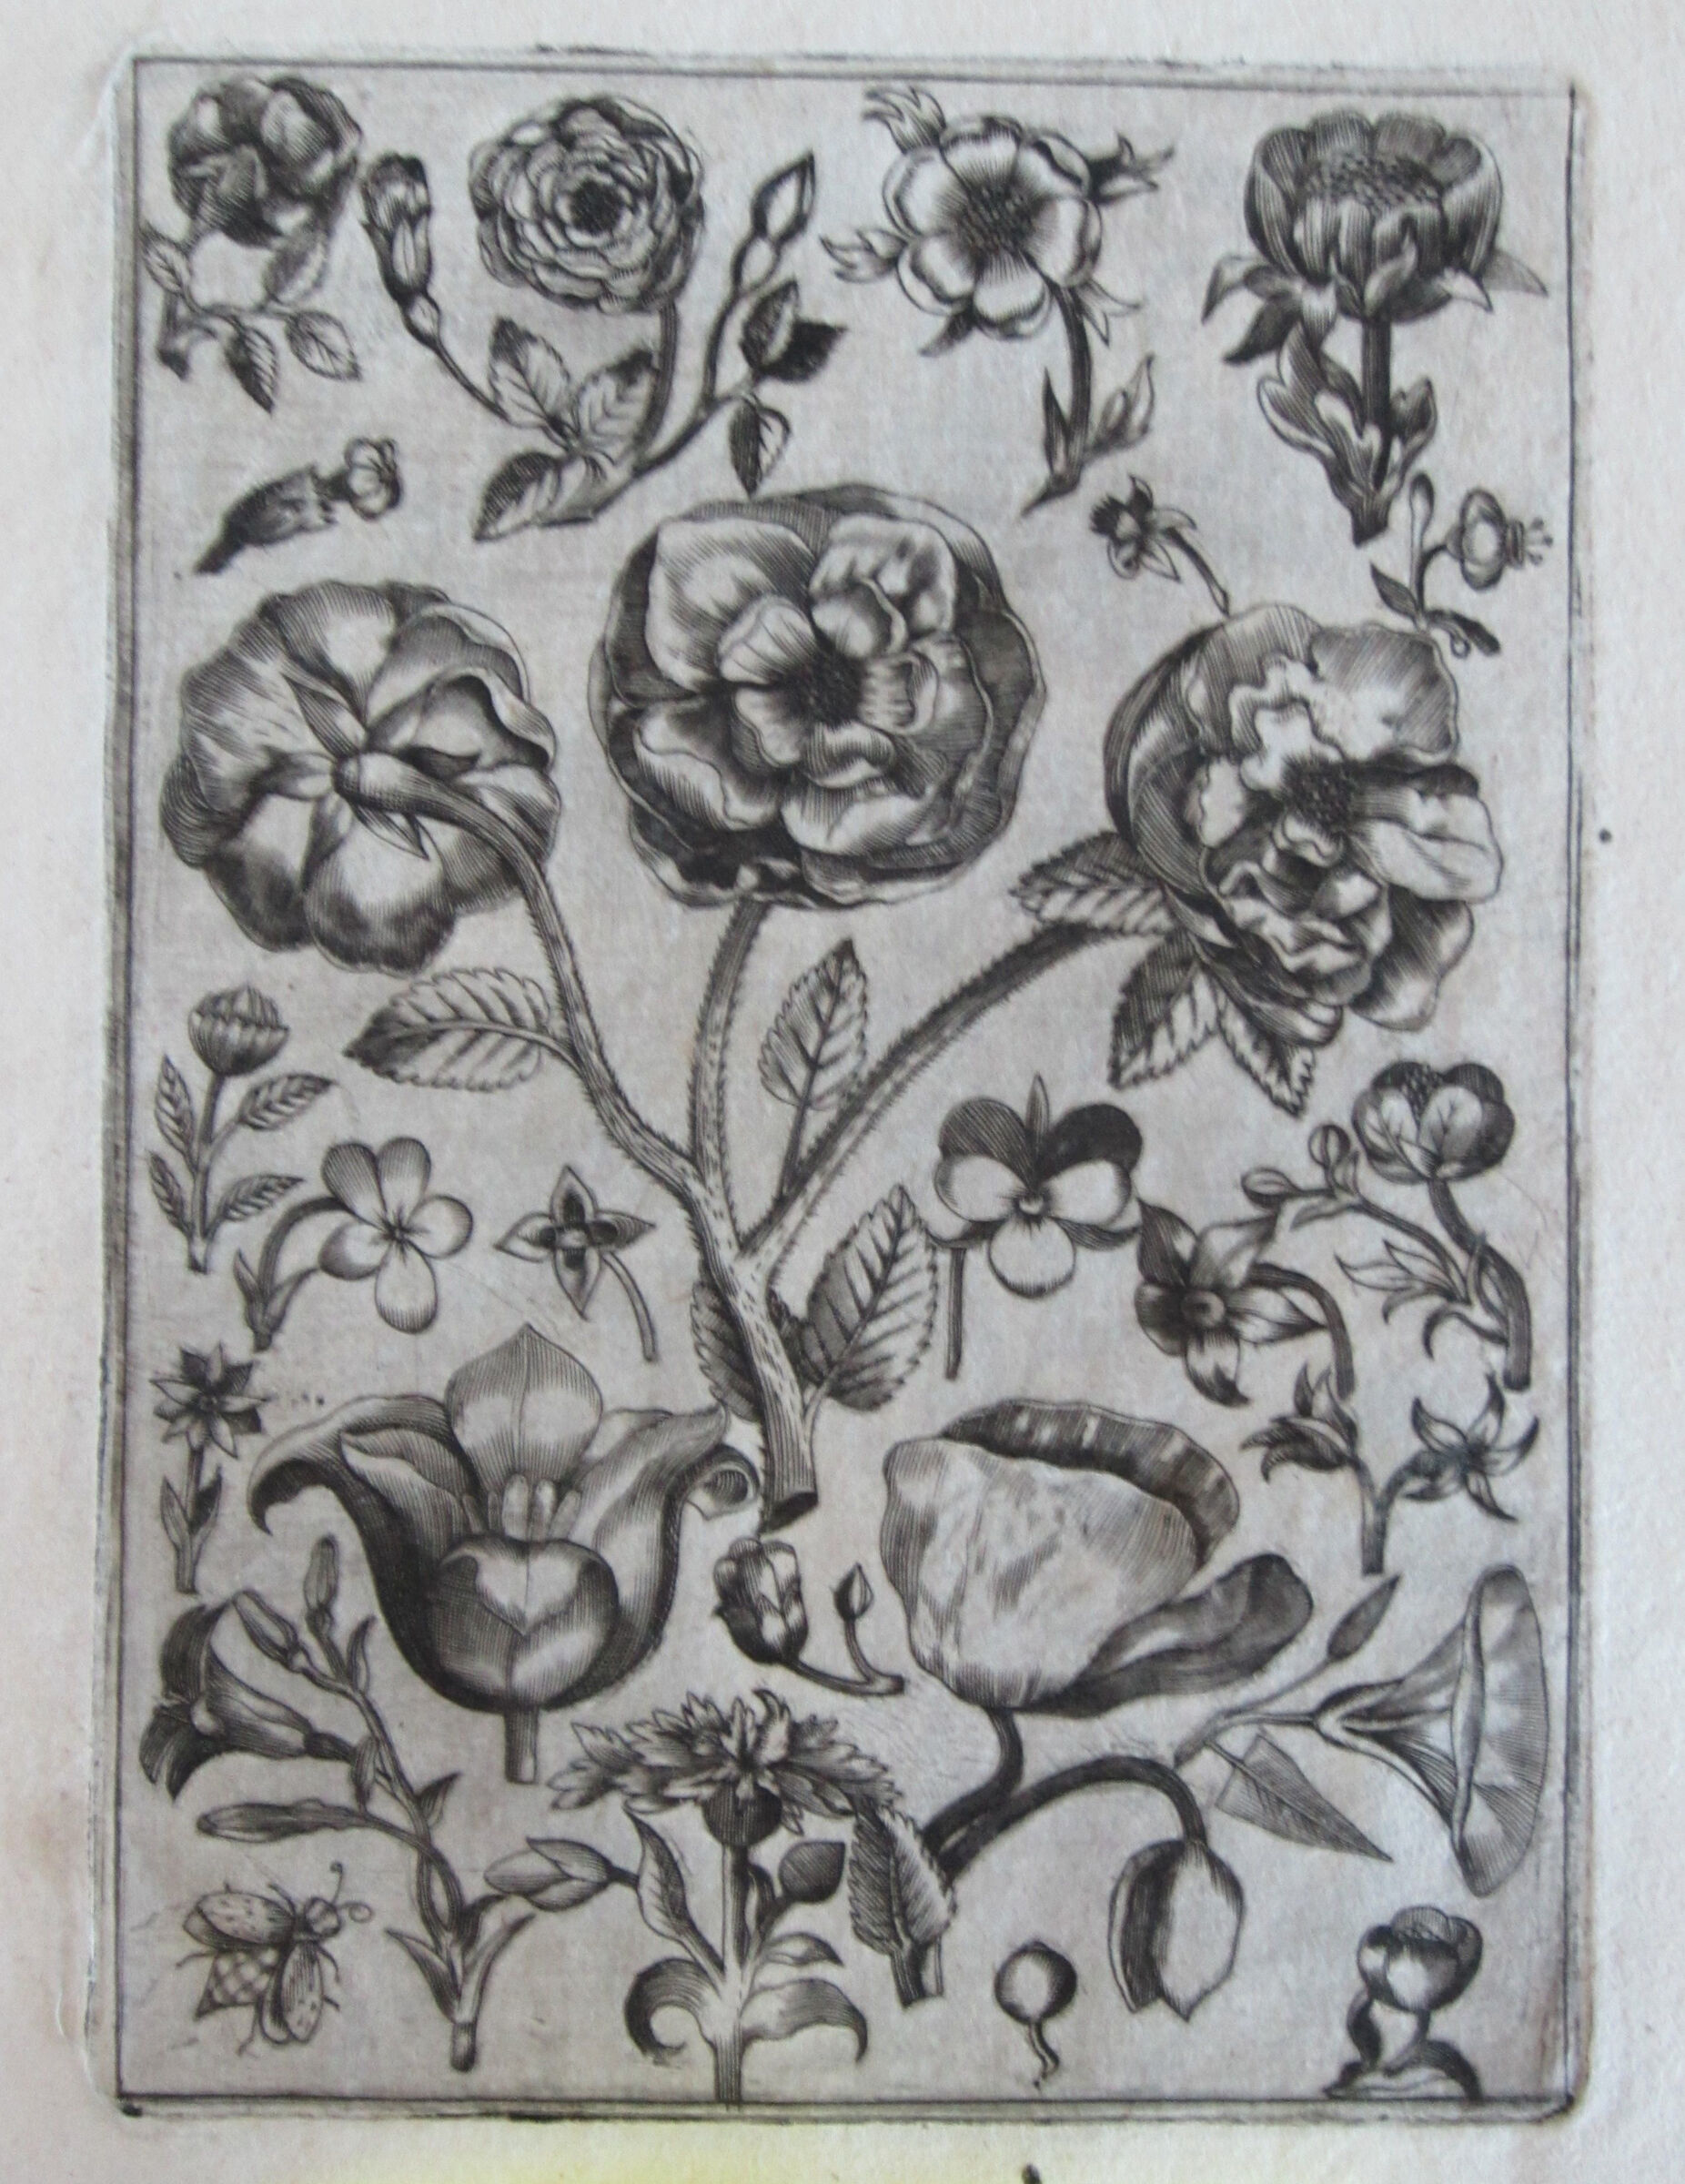 Flowers, With Three Rose Blossoms In The Center And A Bee At The Lower Left